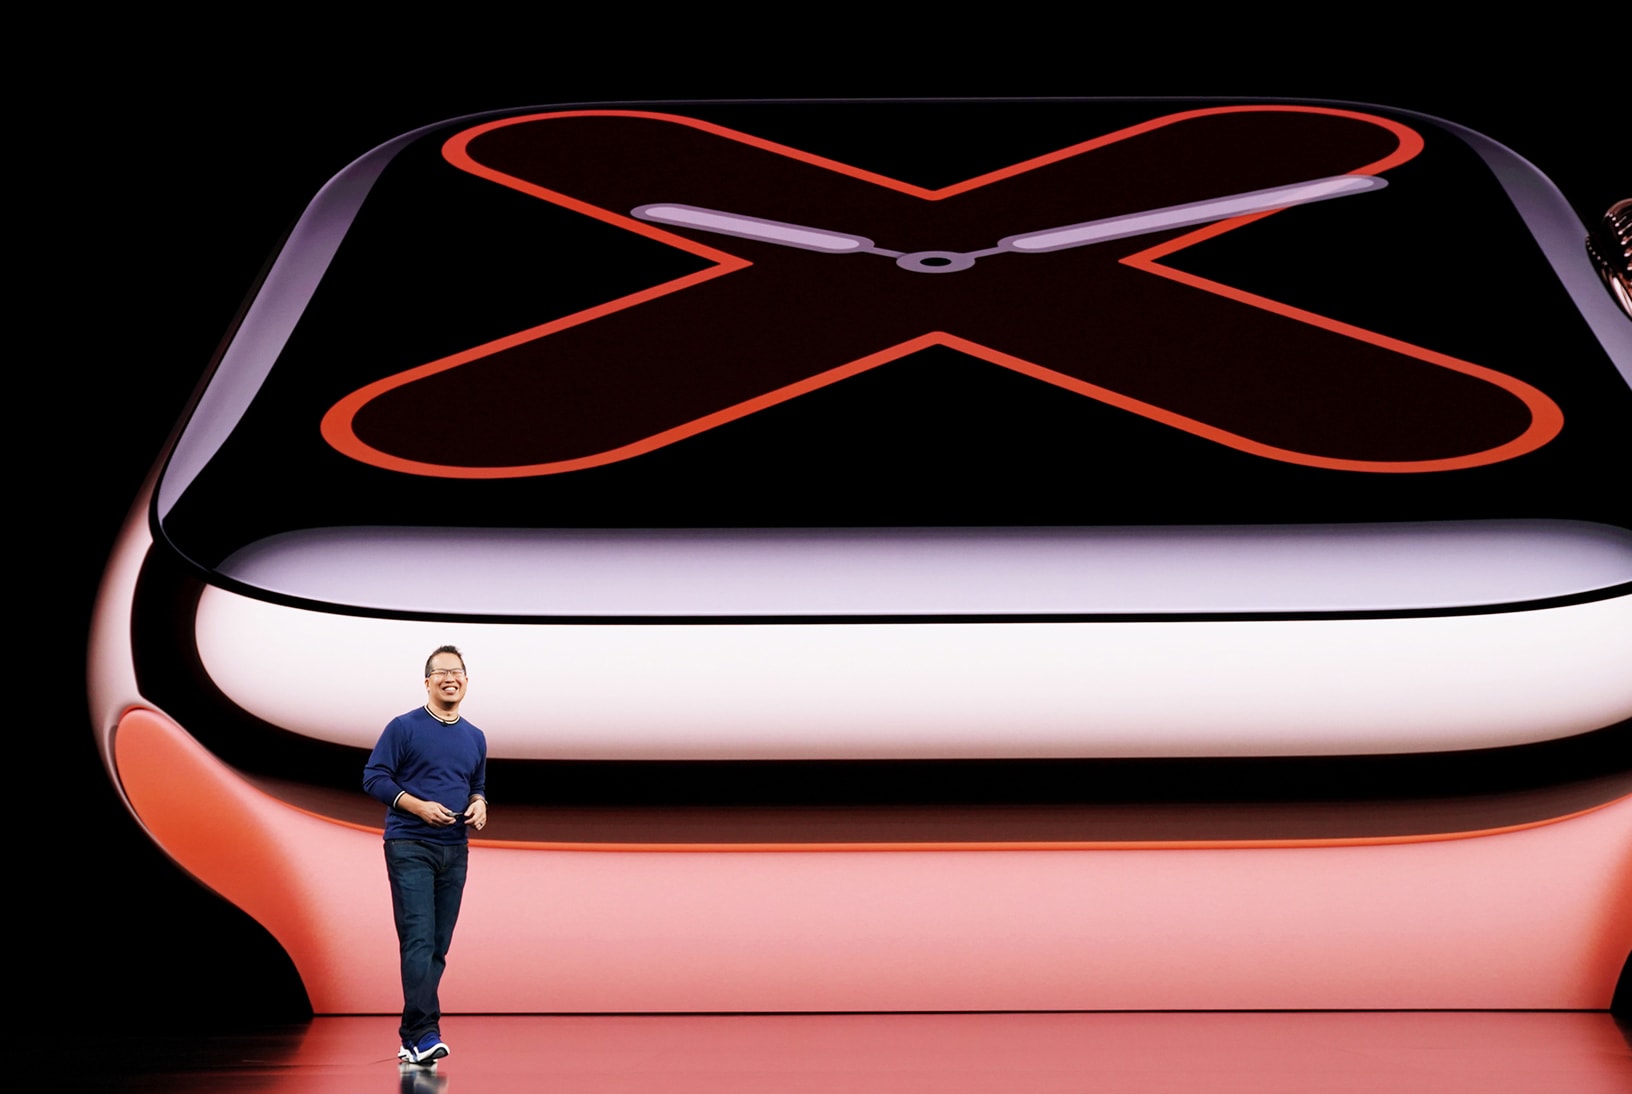 Apple VP Stan Ng shows off Apple Watch Series 5's surprising features during the iPhone 11 event.